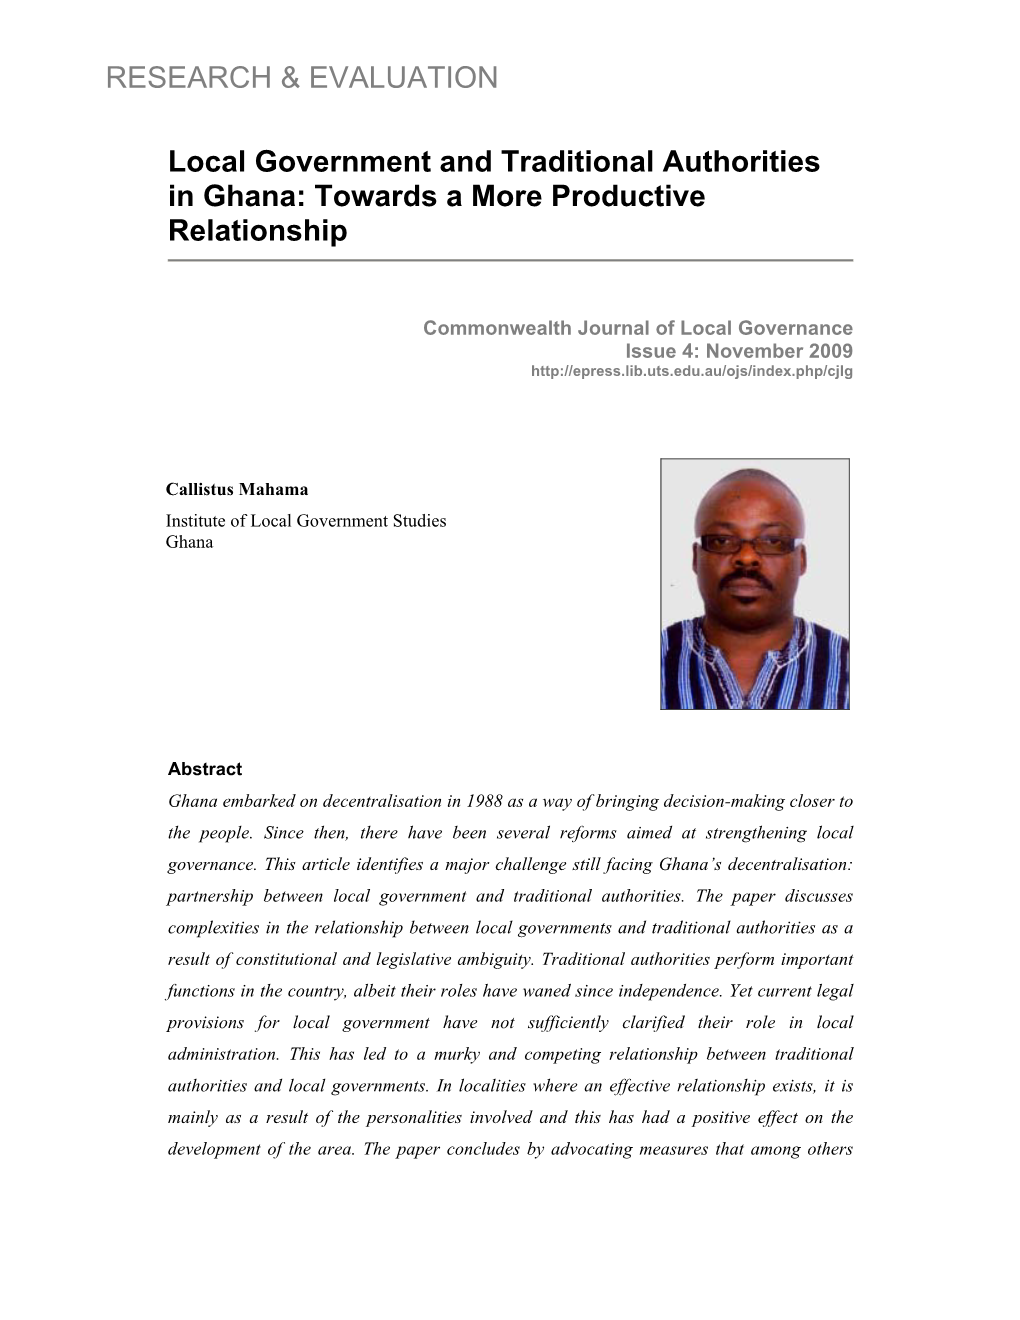 Local Government and Traditional Authorities in Ghana: Towards a More Productive Relationship